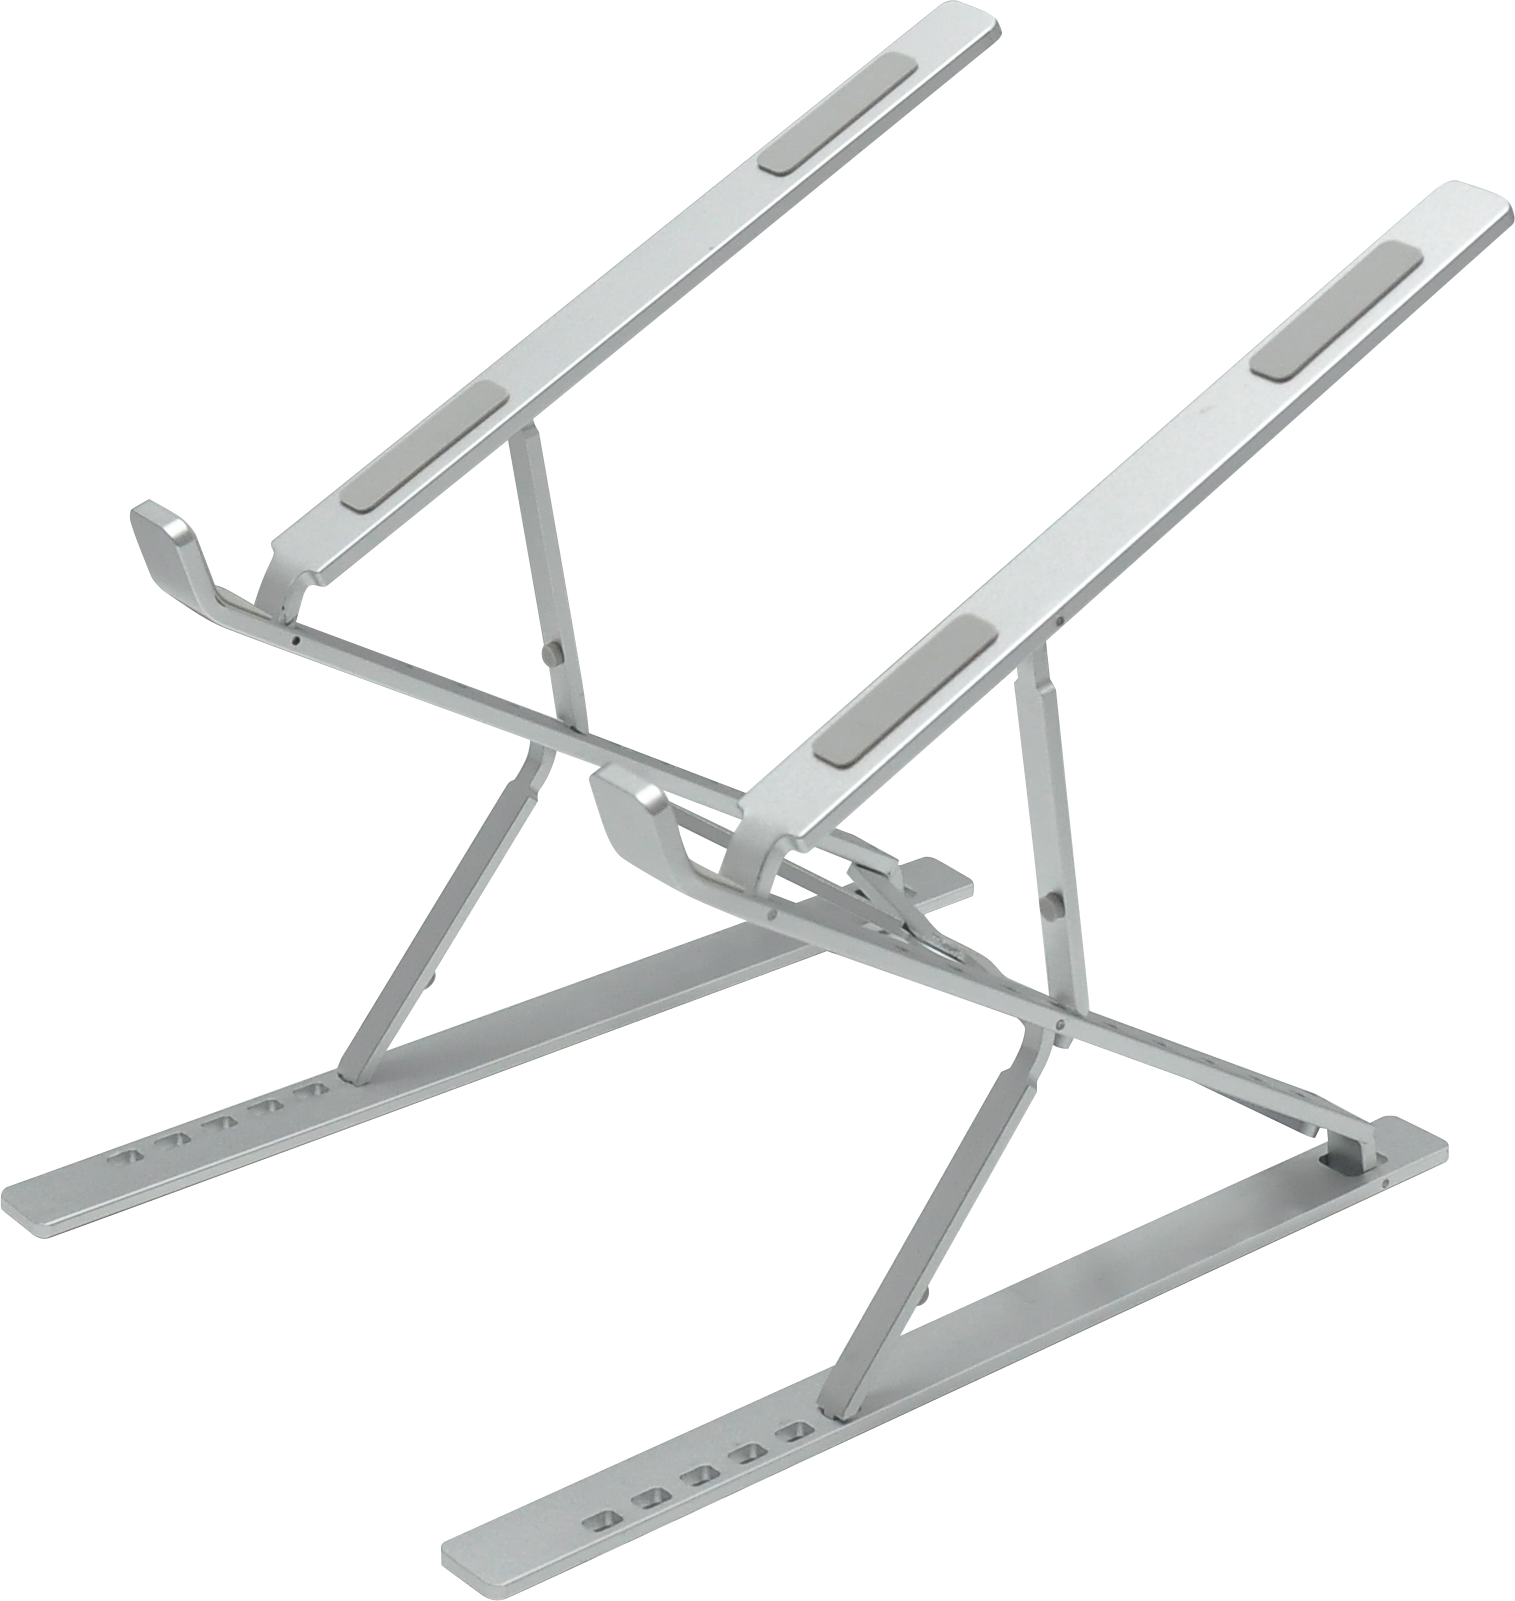 An image showing Folding Boost Laptop Stand